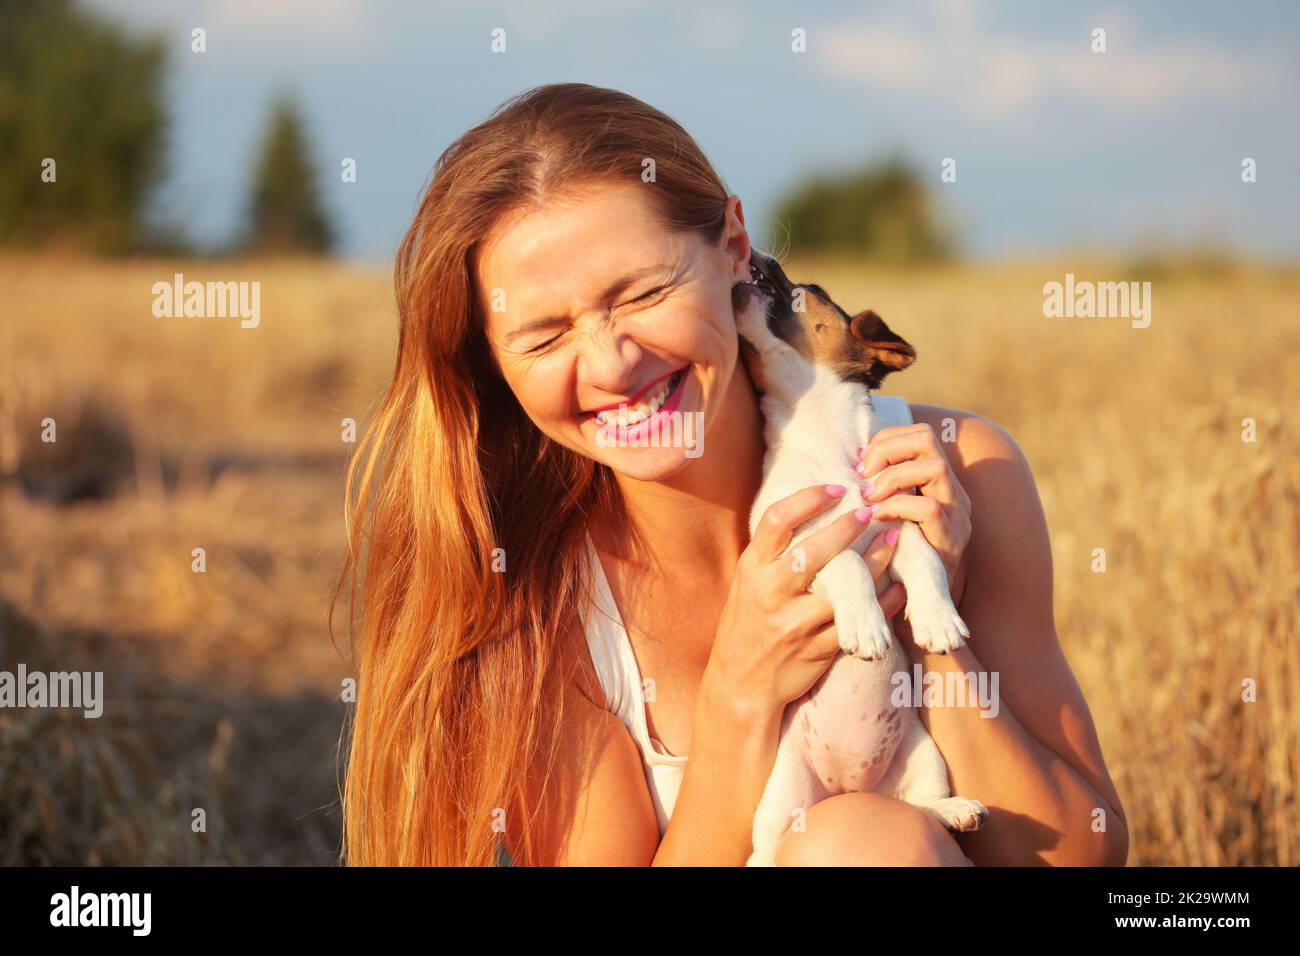 Young brunette woman, holding Jack Russell terrier puppy, that is chewing and licking her ear, so she smiles, sunset lit wheat field in background. Stock Photo